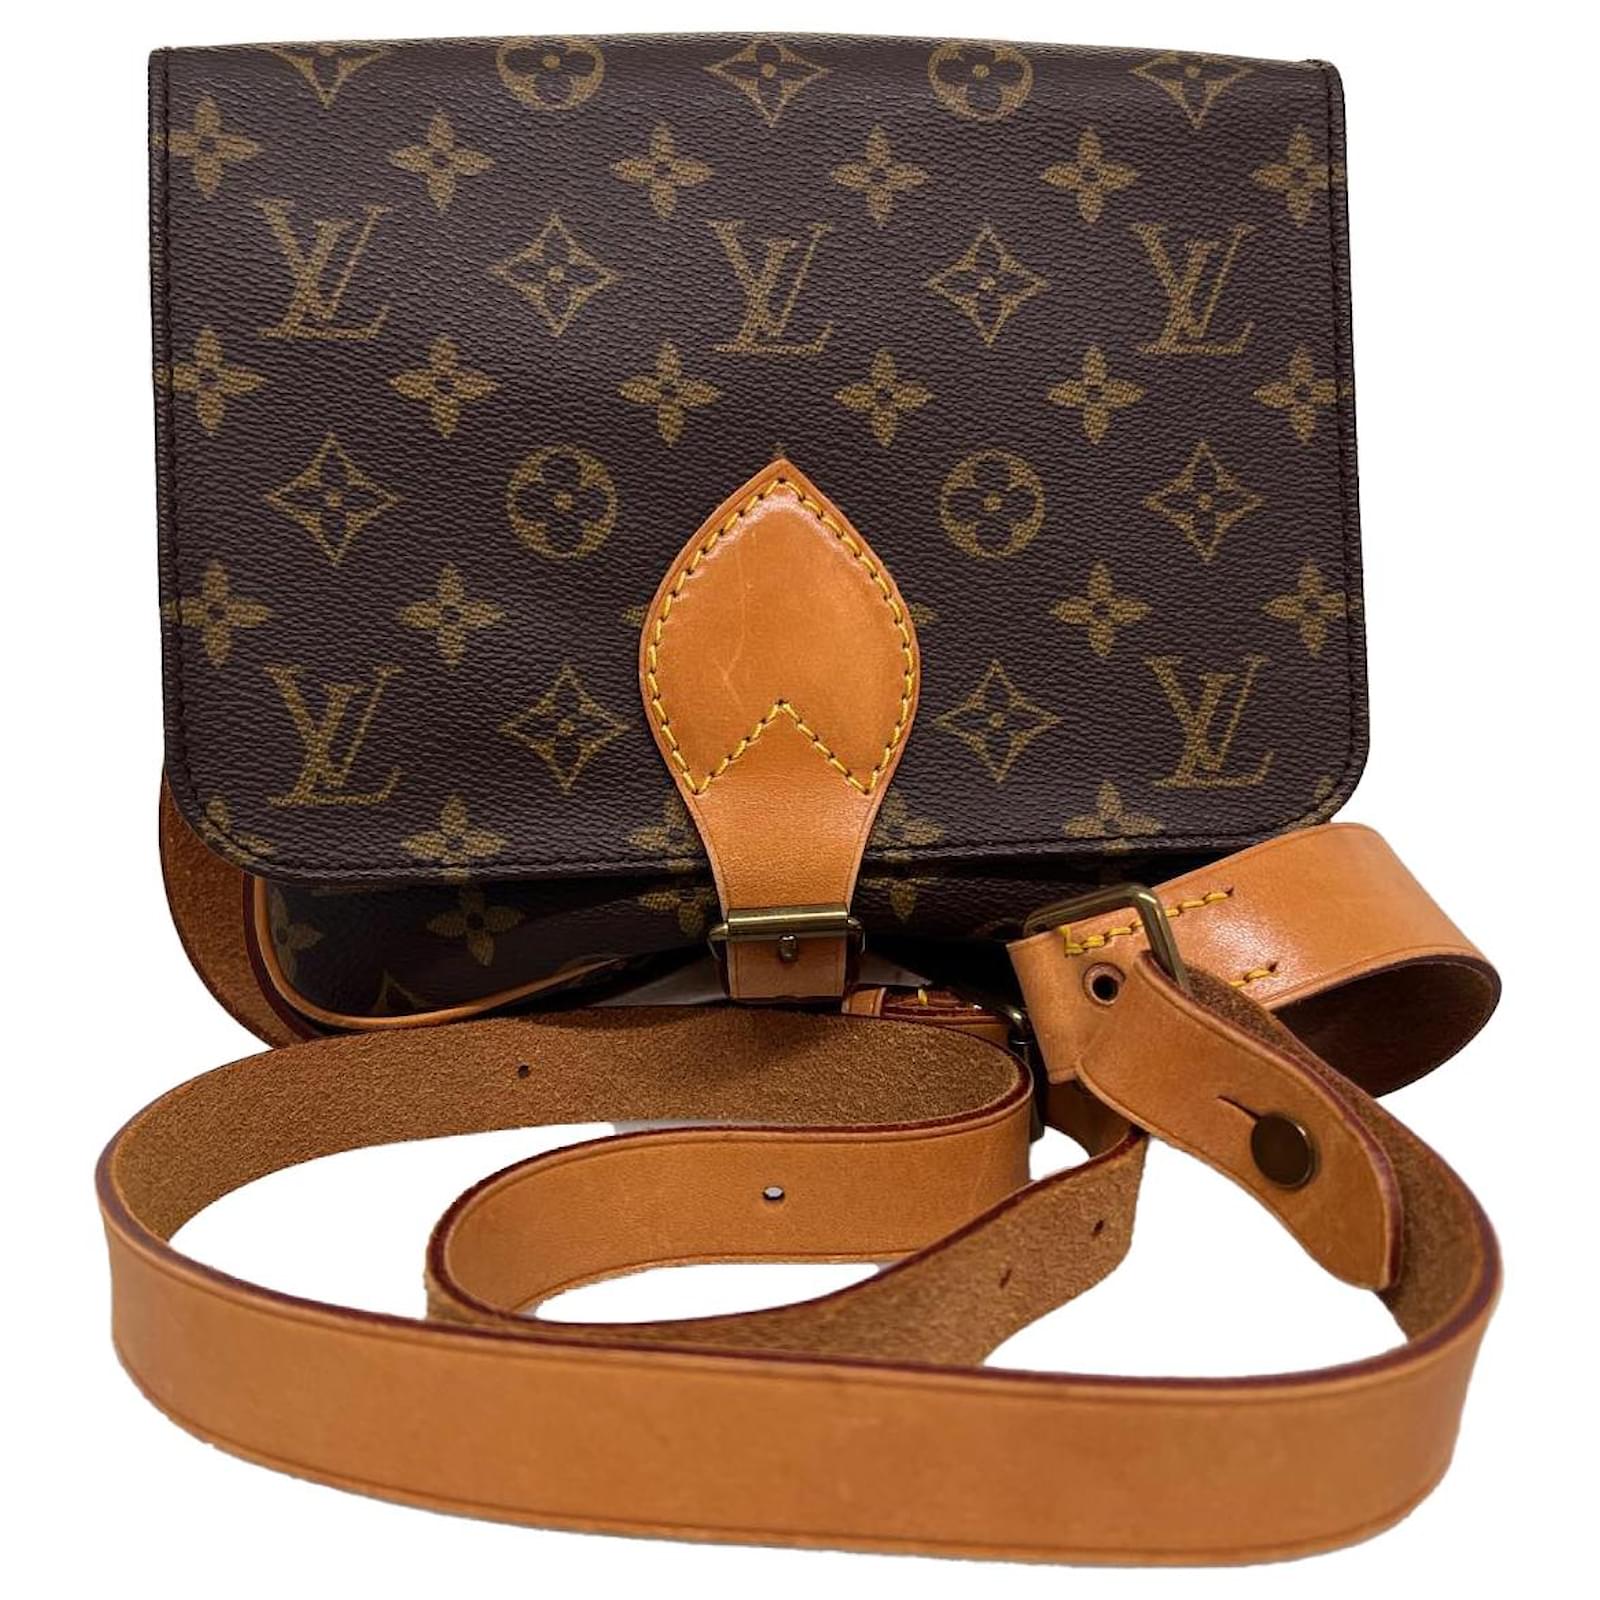 lv cartouchiere mm